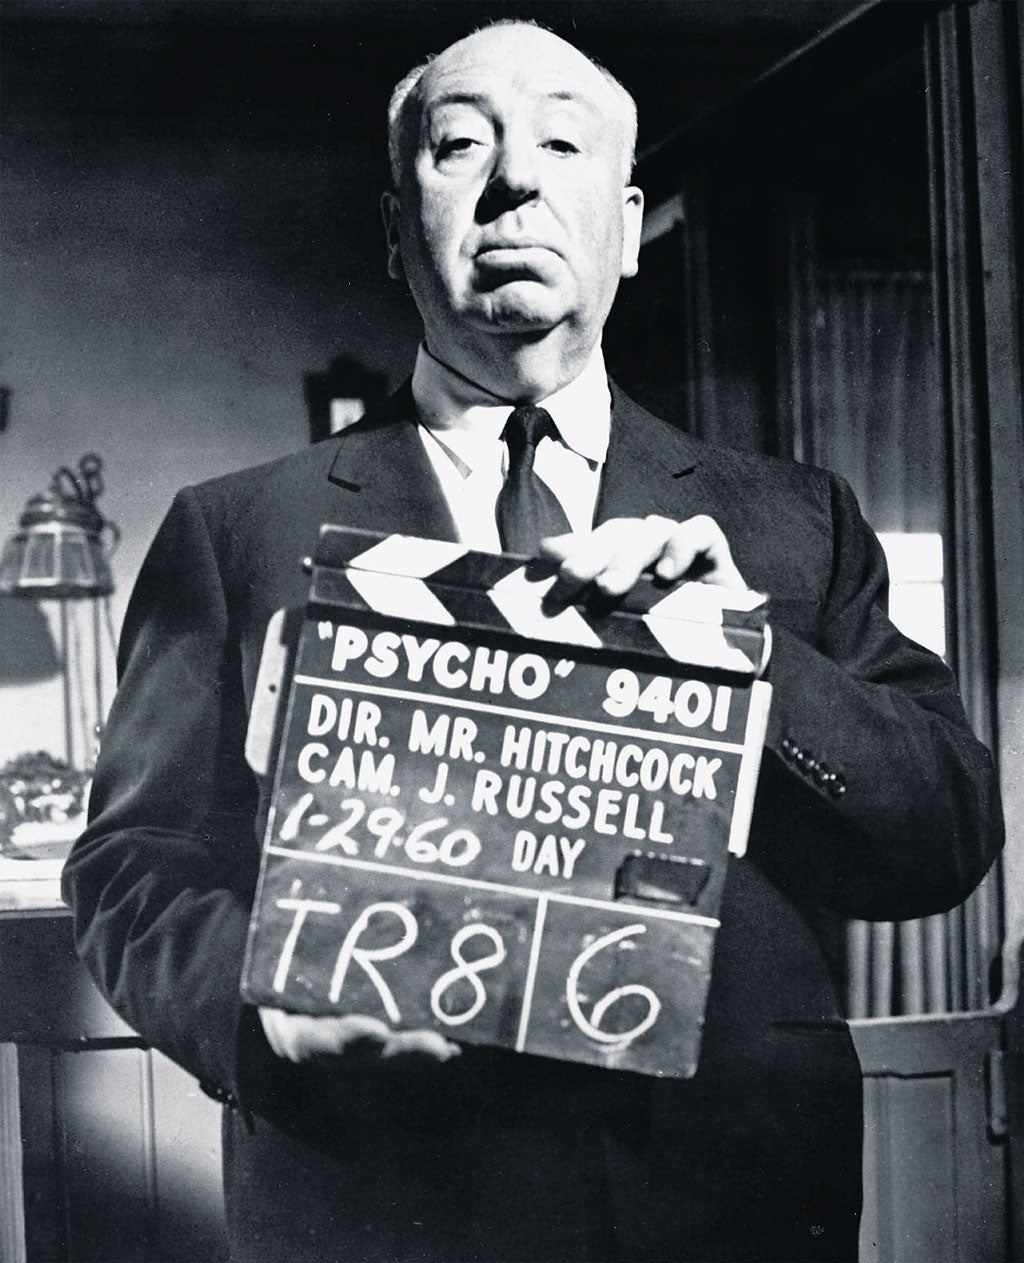 Hitchcock on the set of Psycho (1960)